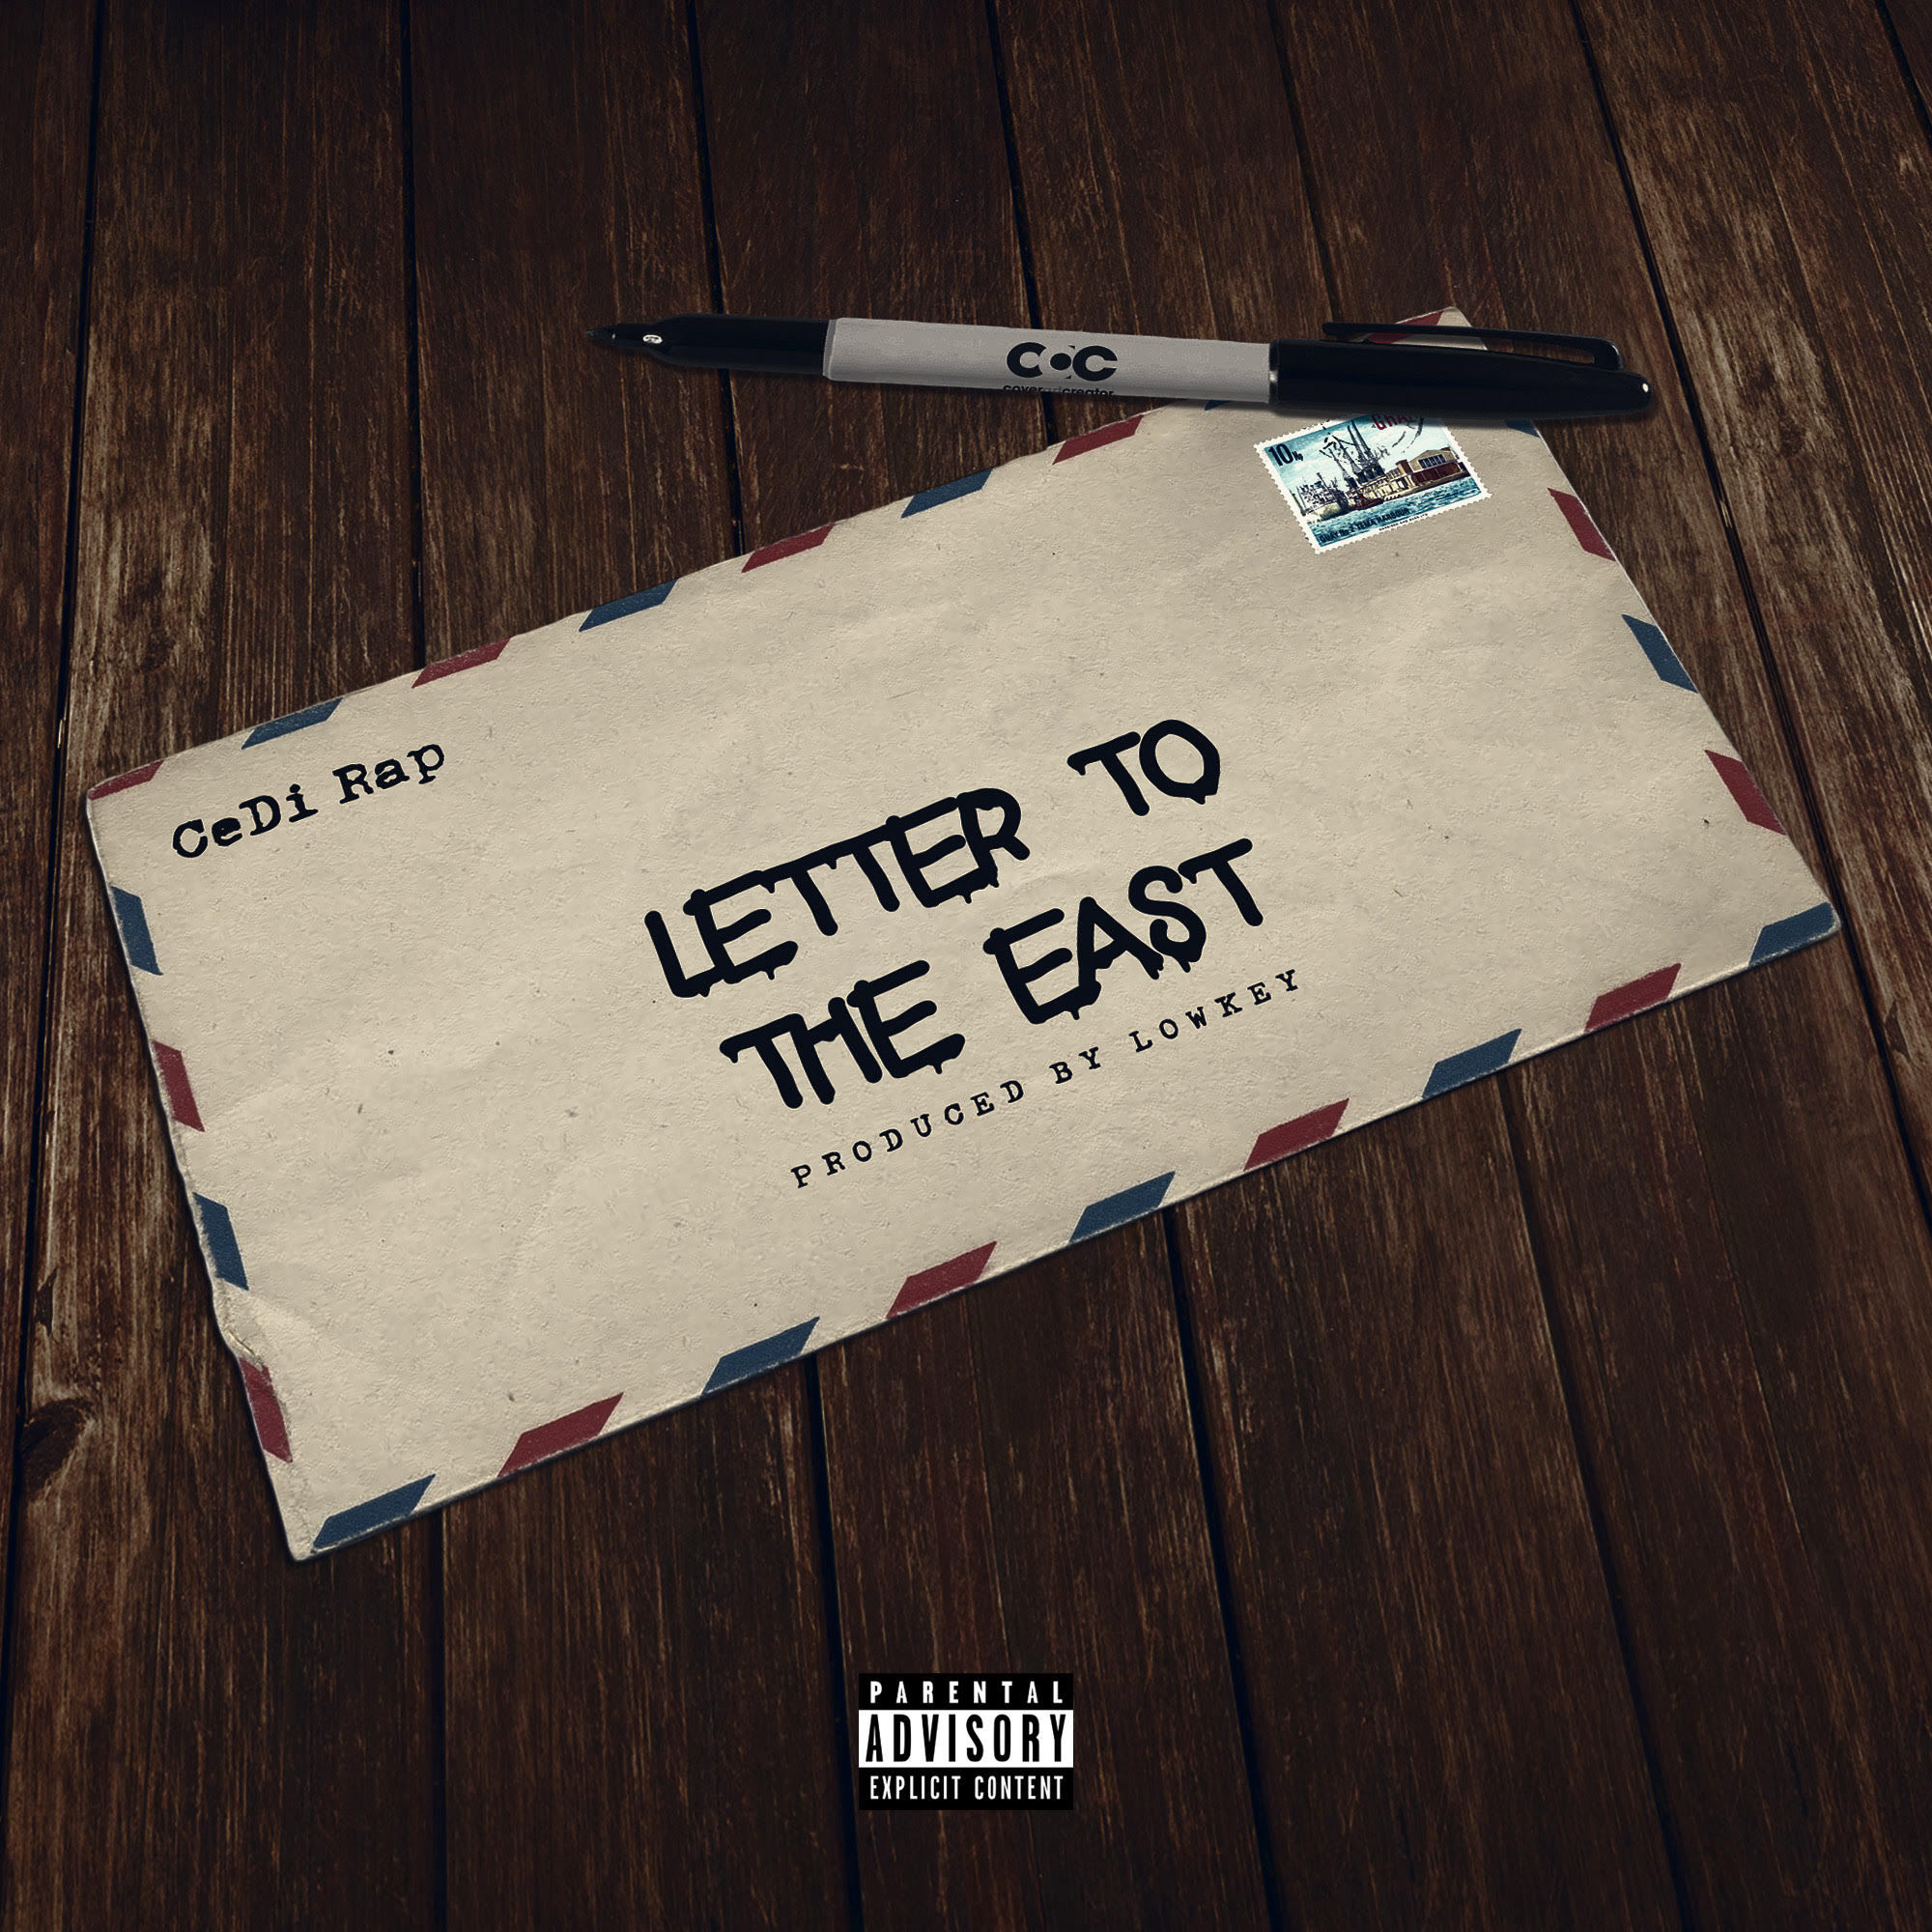 Cedi Rap - Letter To The East 1